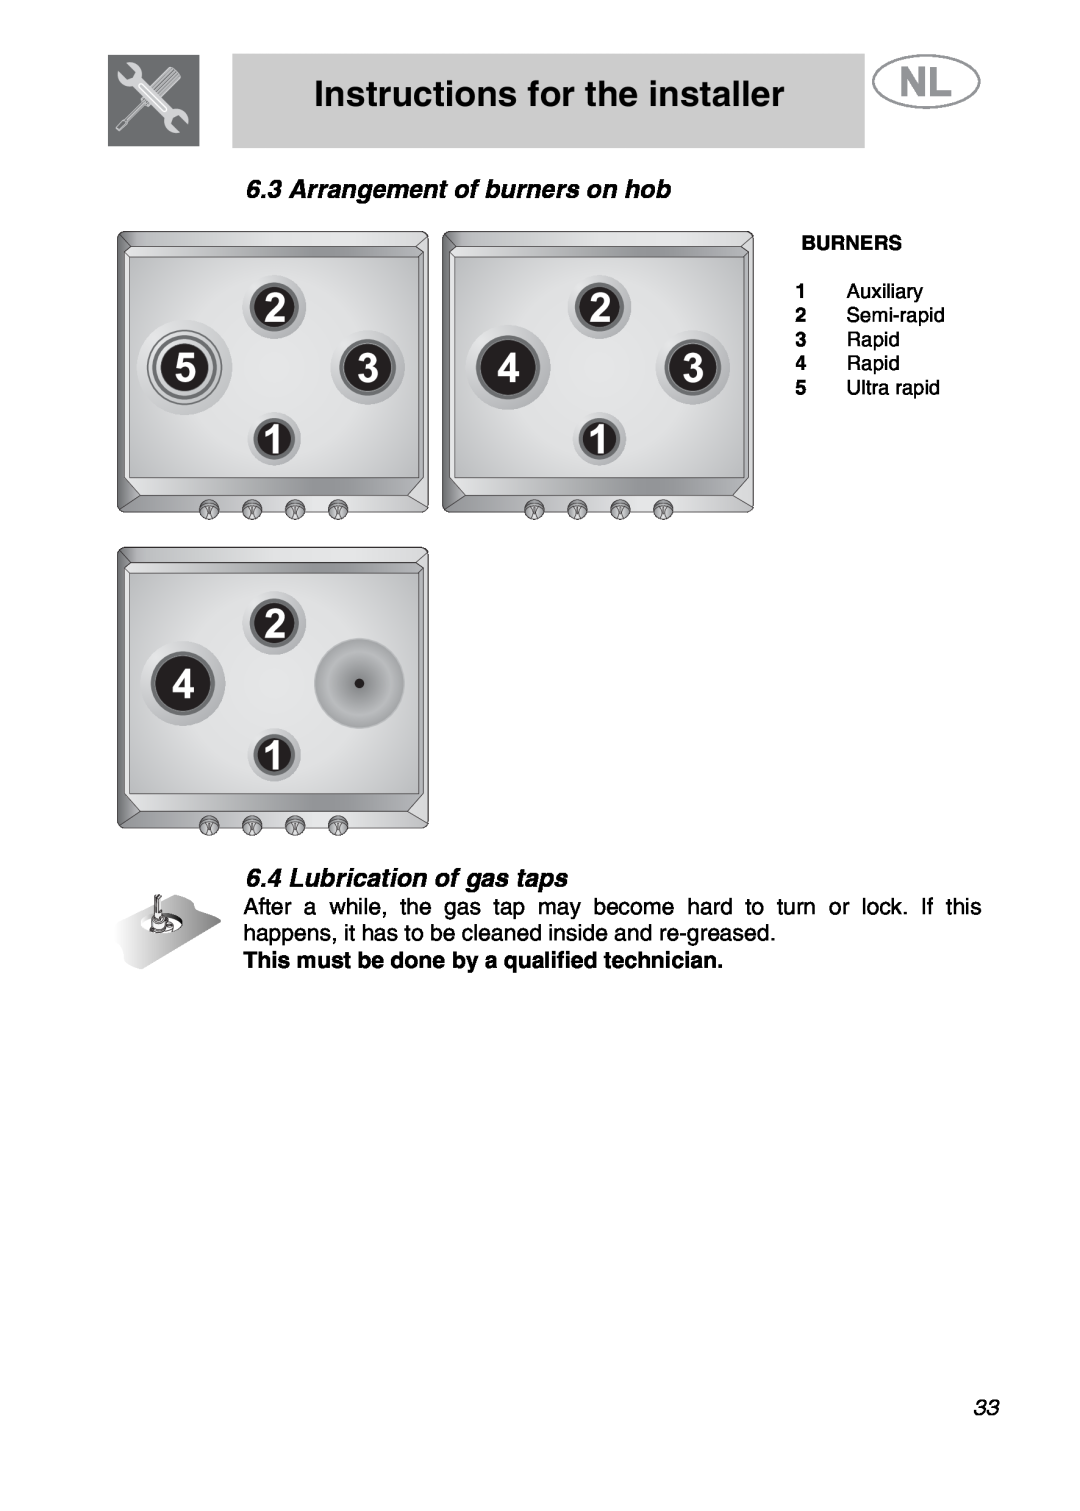 Smeg GKC641-3 Arrangement of burners on hob, Lubrication of gas taps, Instructions for the installer, Burners, Auxiliary 